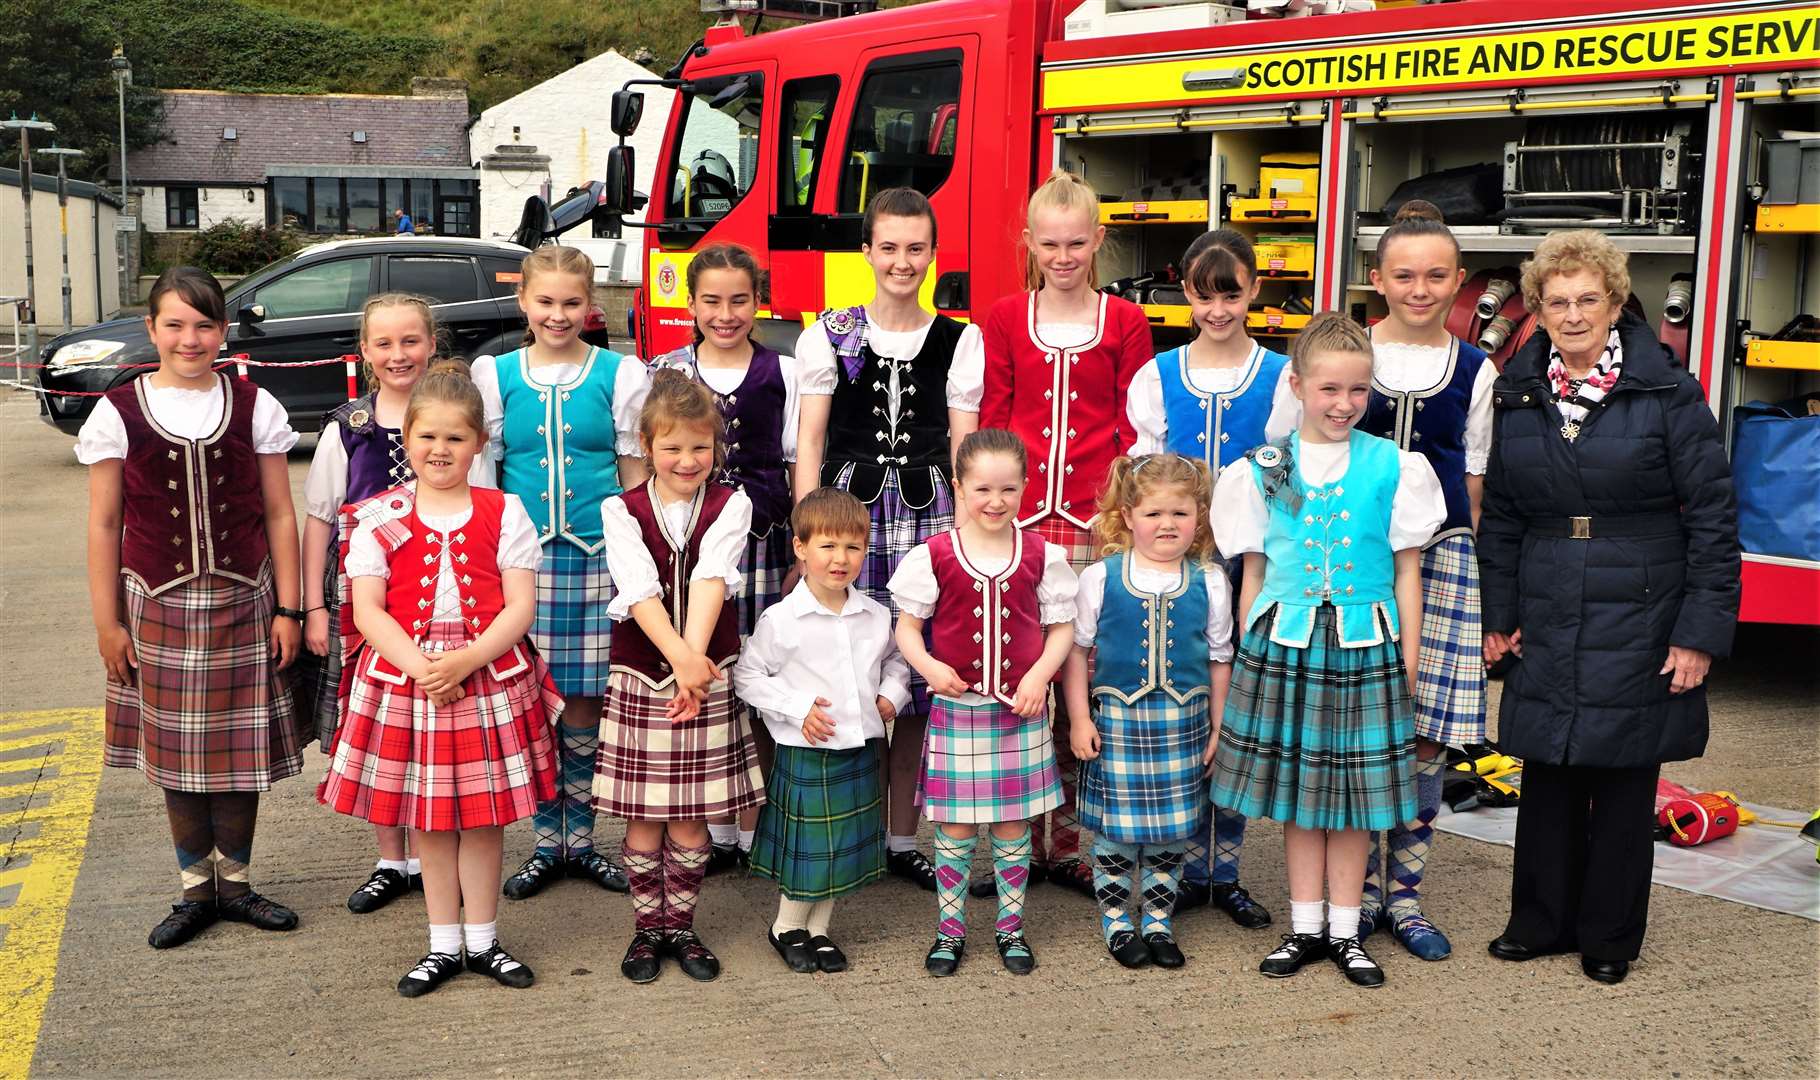 Mina Mackay, at extreme right, with her Highland dancing team at the Thurso Lifeboat Open Day held at Scrabster on Sunday. Picture: DGS